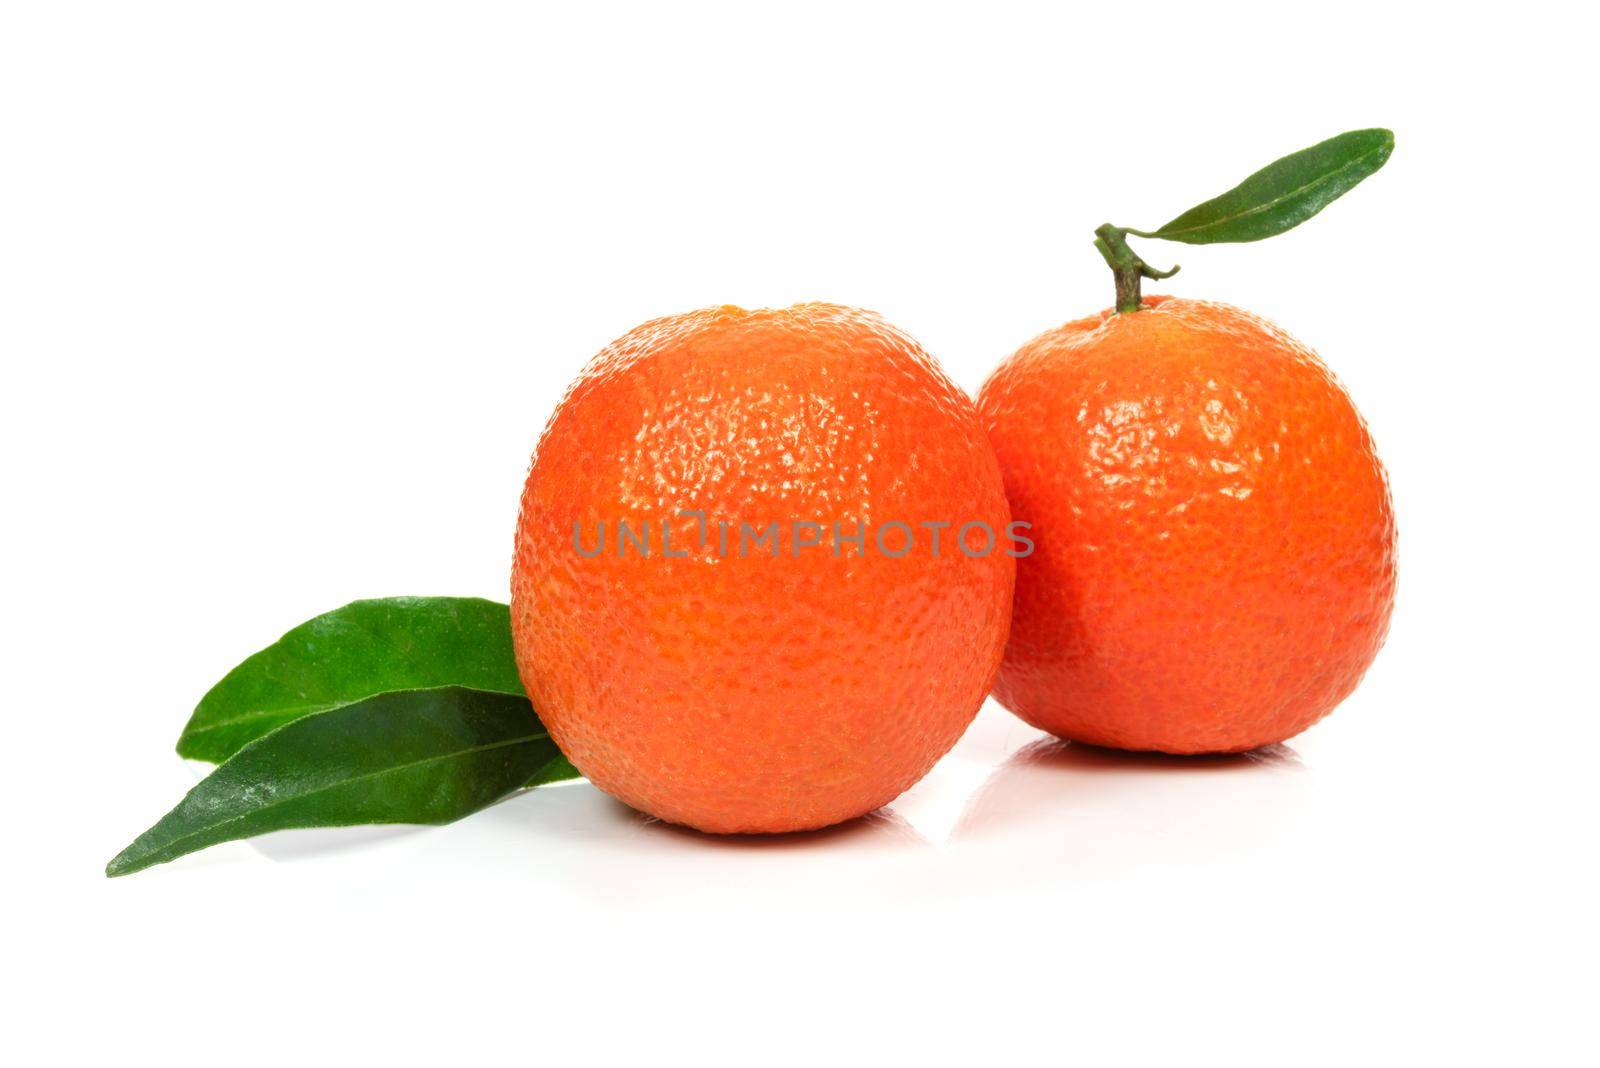 Two perfect orange or tangerine fresh fruitd with leaves on a white background in close-up